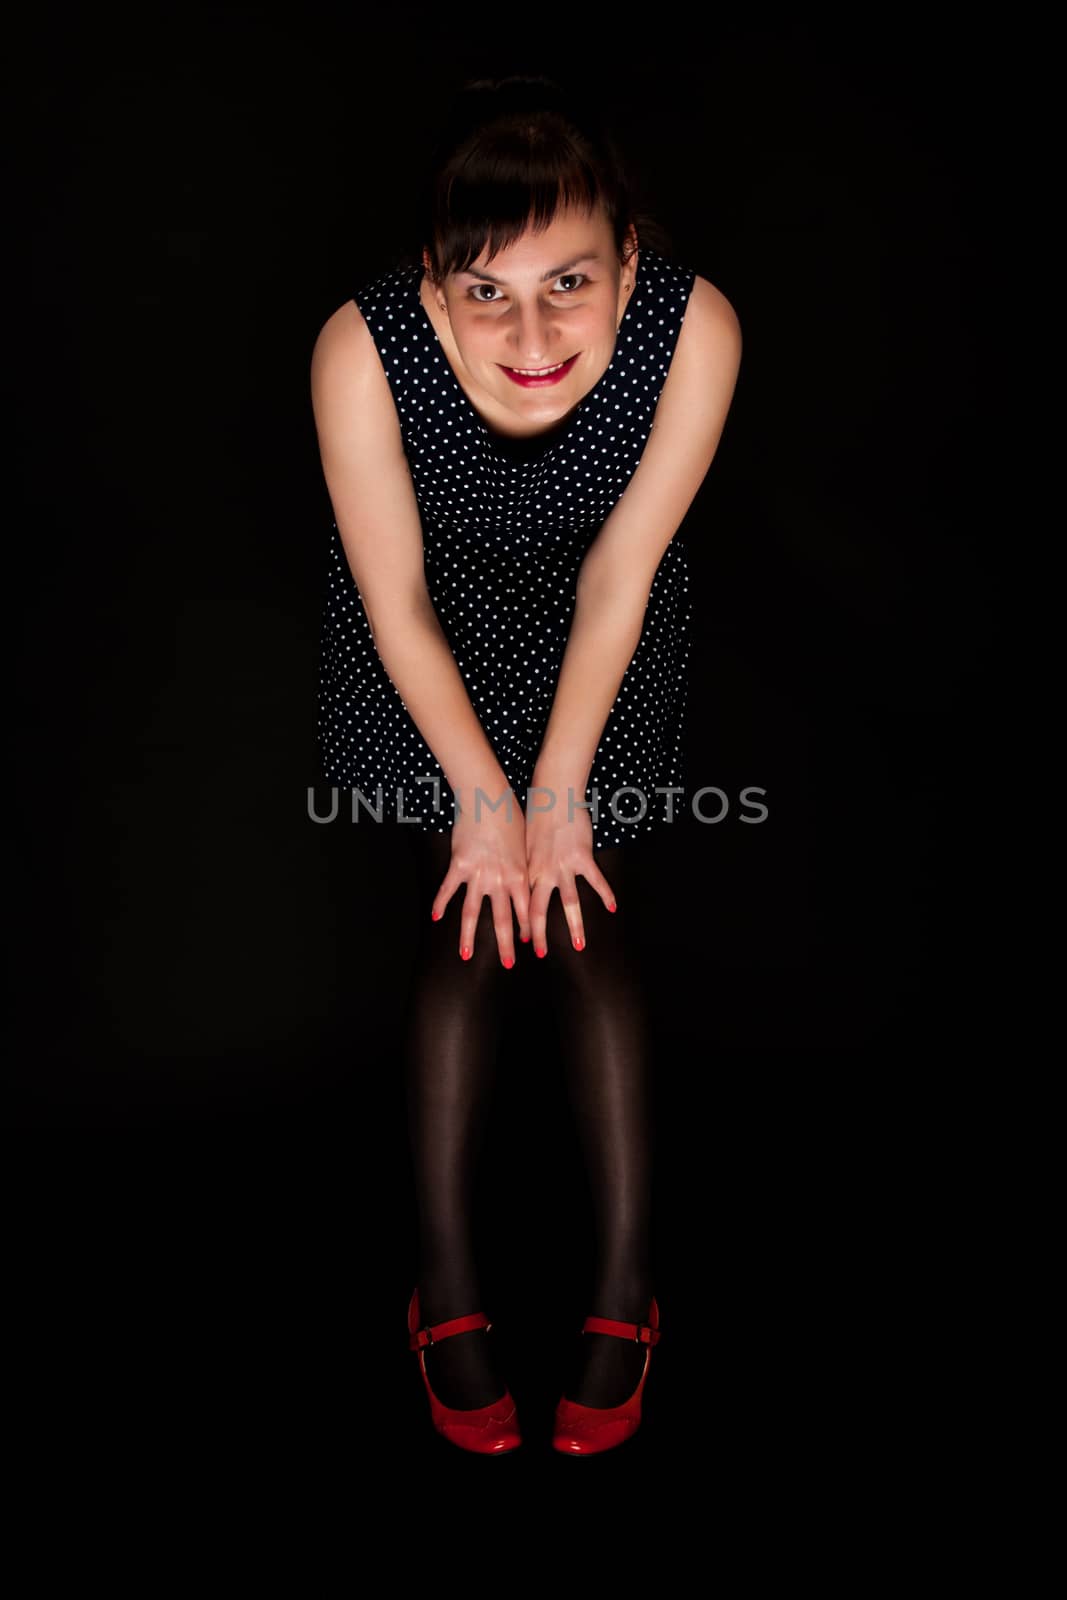 stylish expressive woman with red shoes on black background